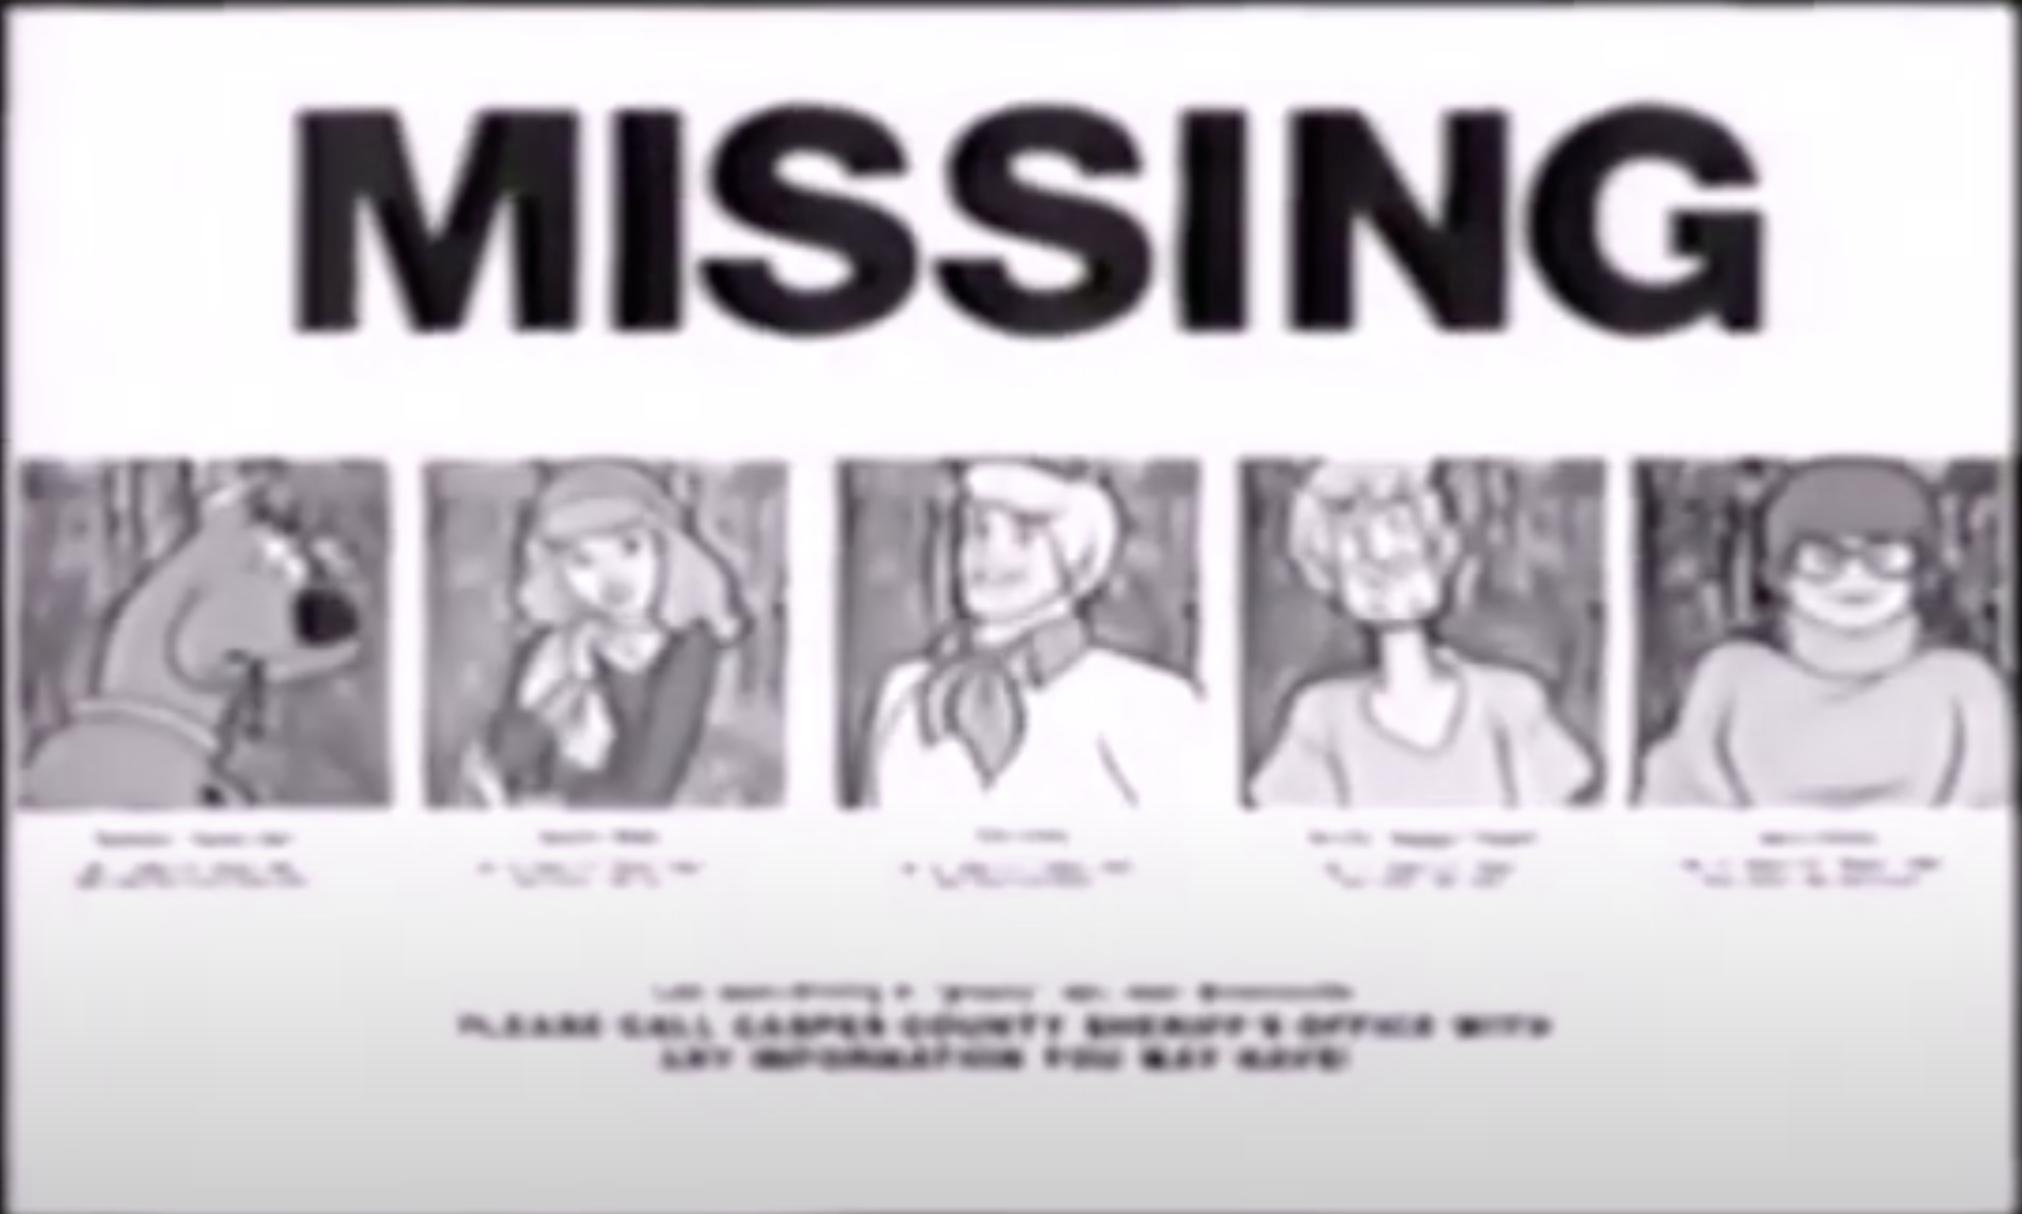 A missing poster of the mystery gang